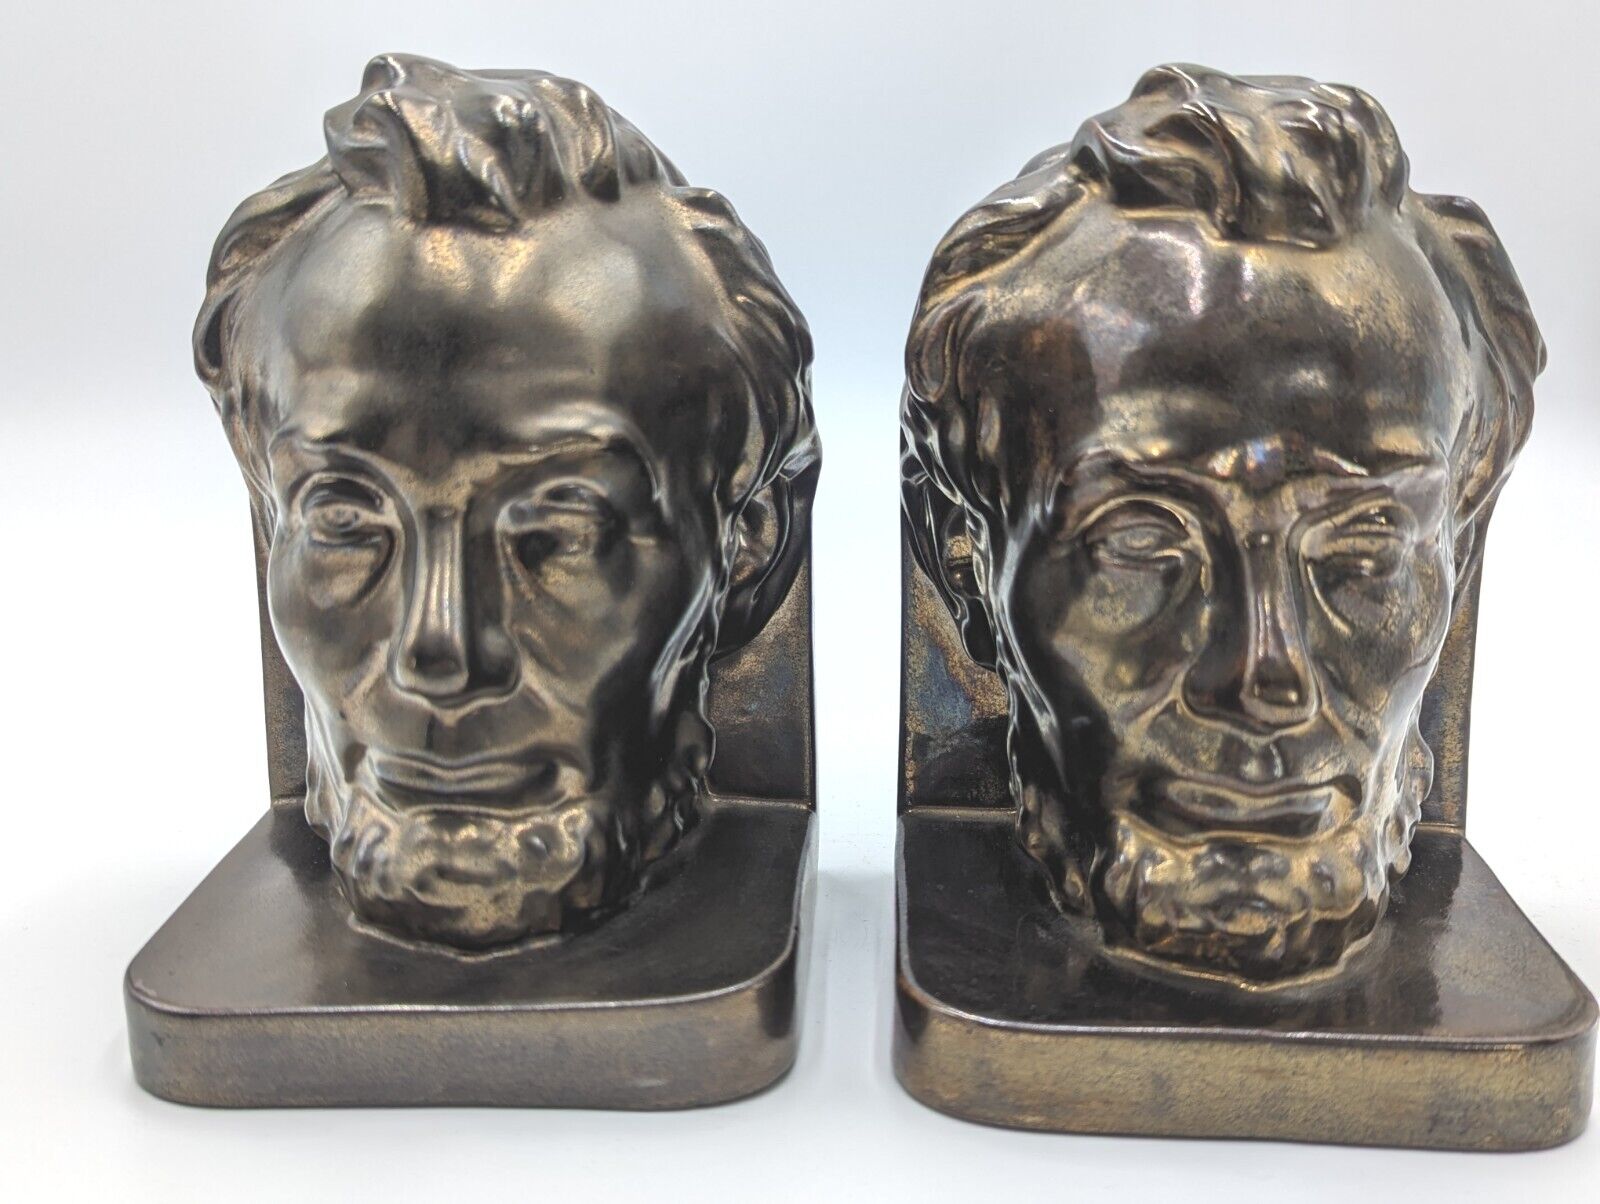 Vintage Abe Lincoln Bookends Ceramic Painted Shiny Bronze  Large Face Set Of 2